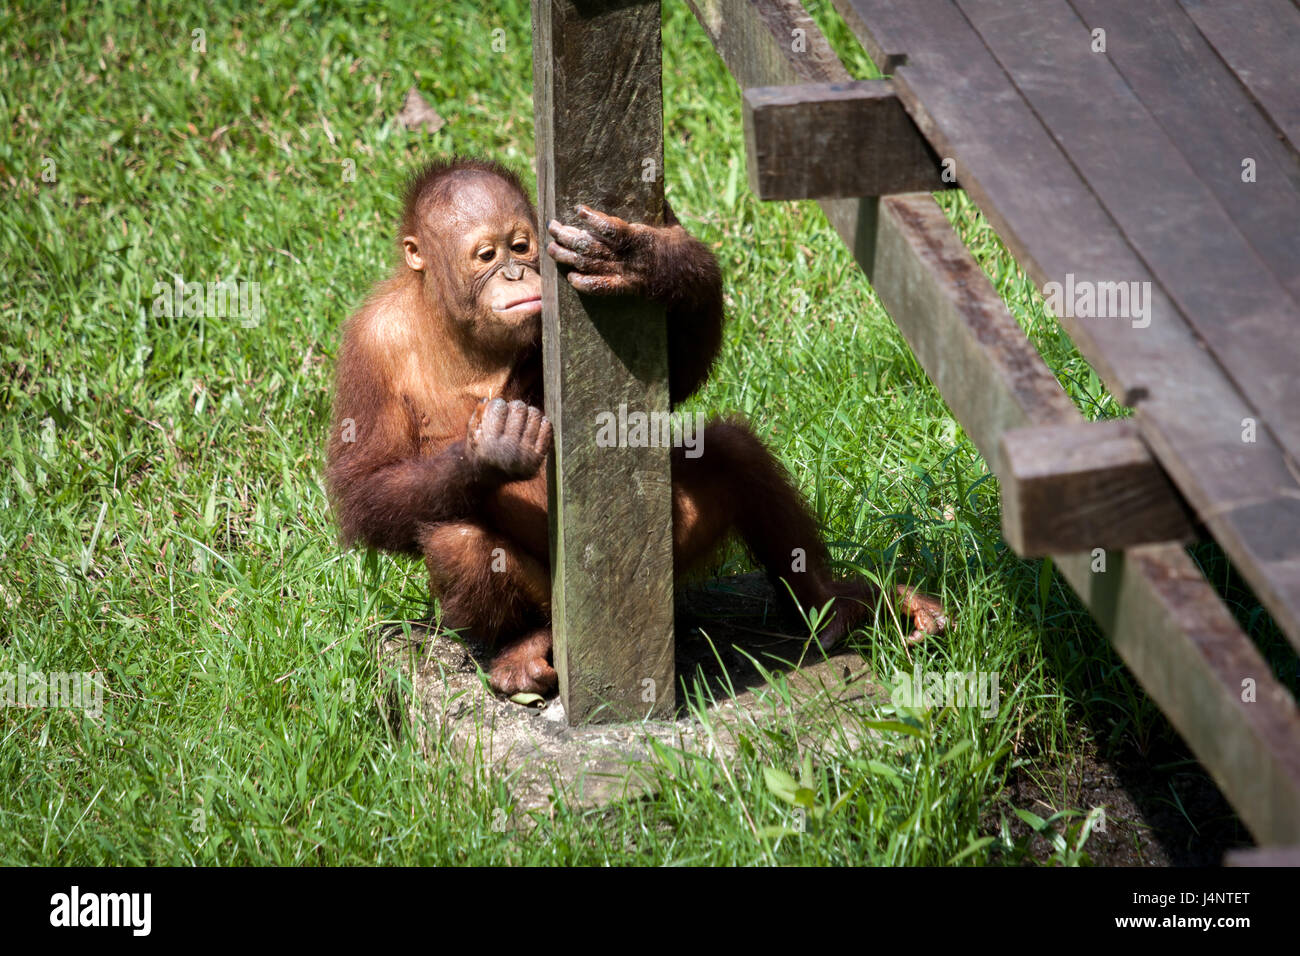 Cute baby Orangutan sitting on the grass amusing itself at Matang Wildlife Center in Borneo. Orangutans are fast becoming an endangered species Stock Photo